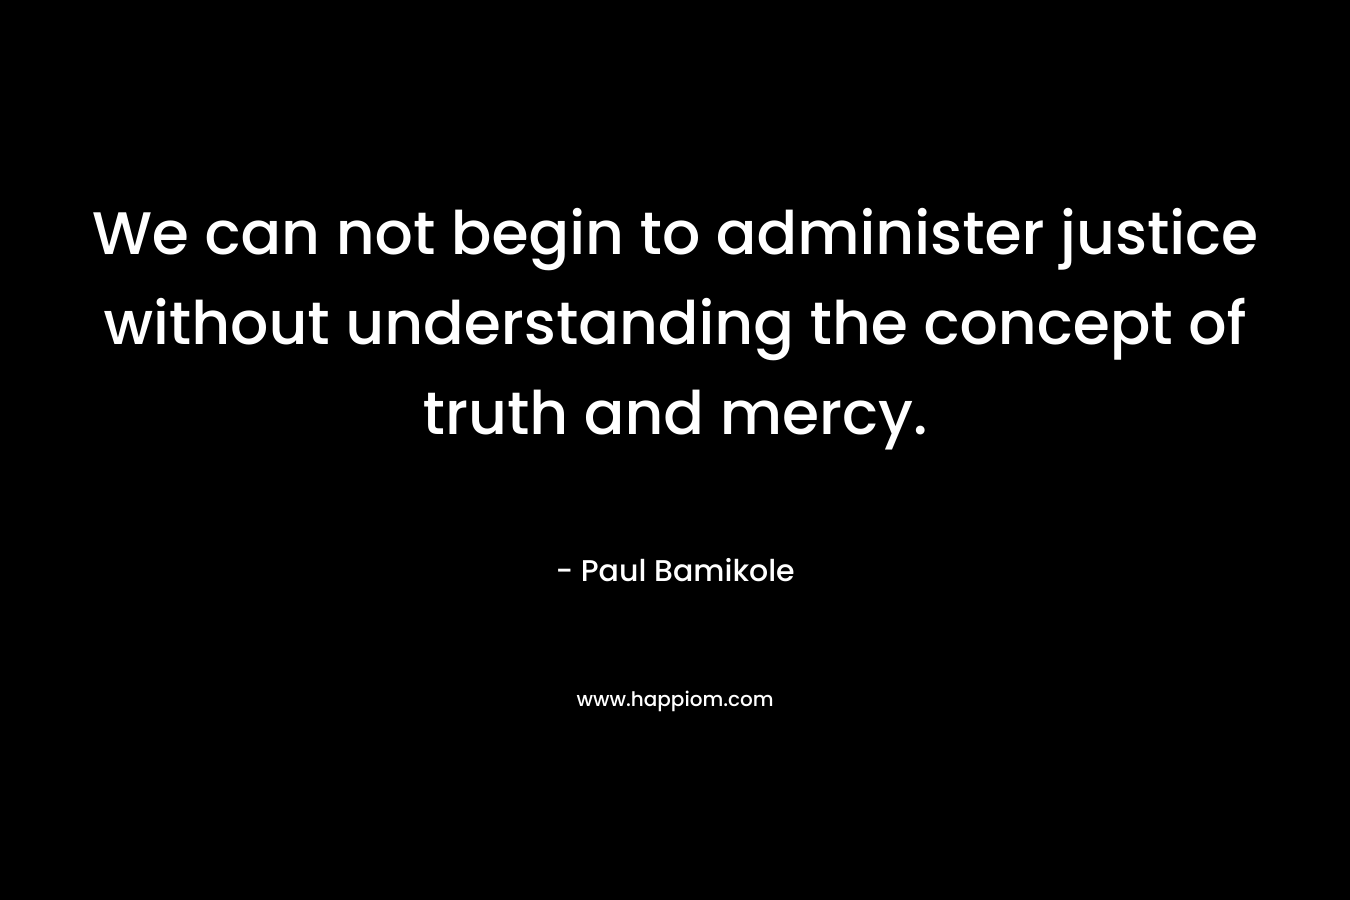 We can not begin to administer justice without understanding the concept of truth and mercy. – Paul Bamikole